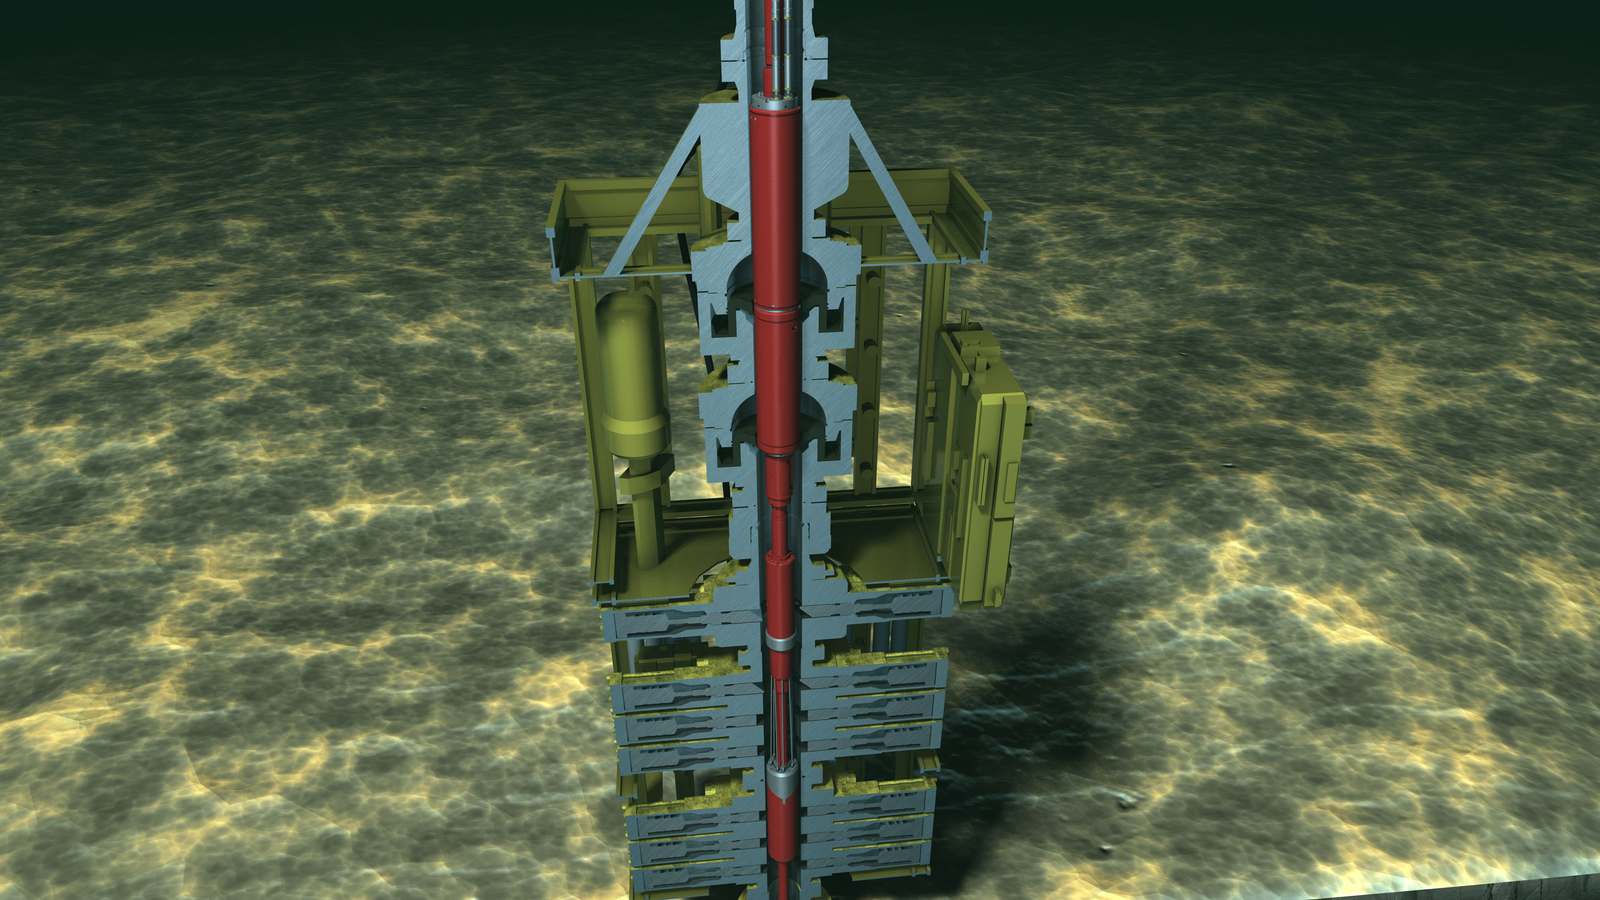 Dash® EH Subsea Safety Systems